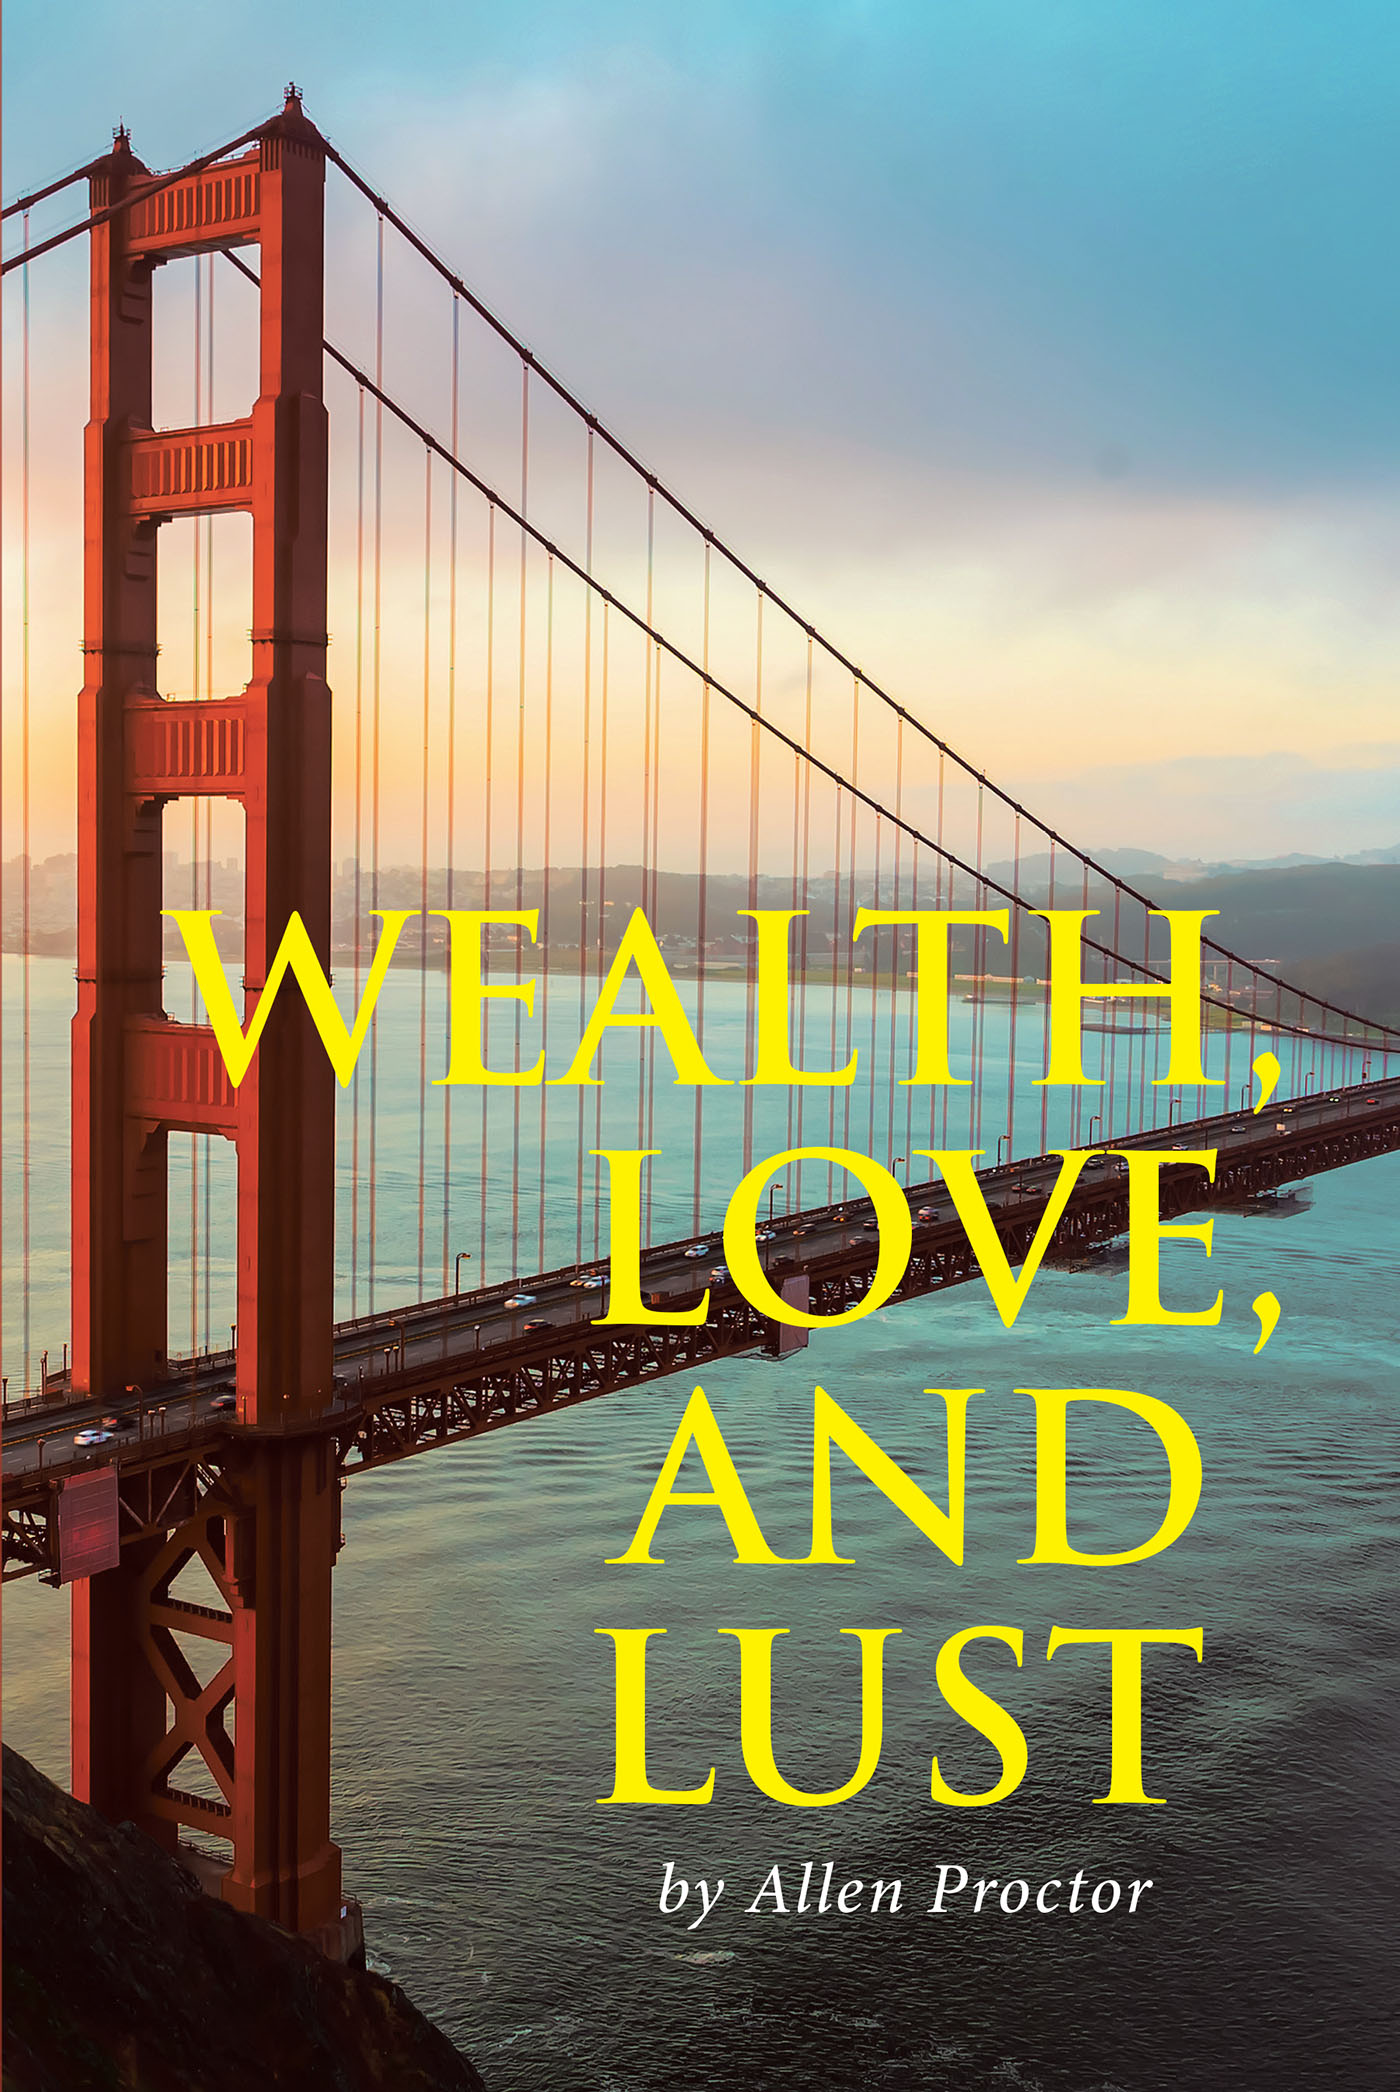 Author Allen Proctor’s New Book "Wealth, Love, and Lust" is a Riveting Story of Dynasty & the Vagaries of Life for Two Wealthy Families Whose Destinies Are Intertwined